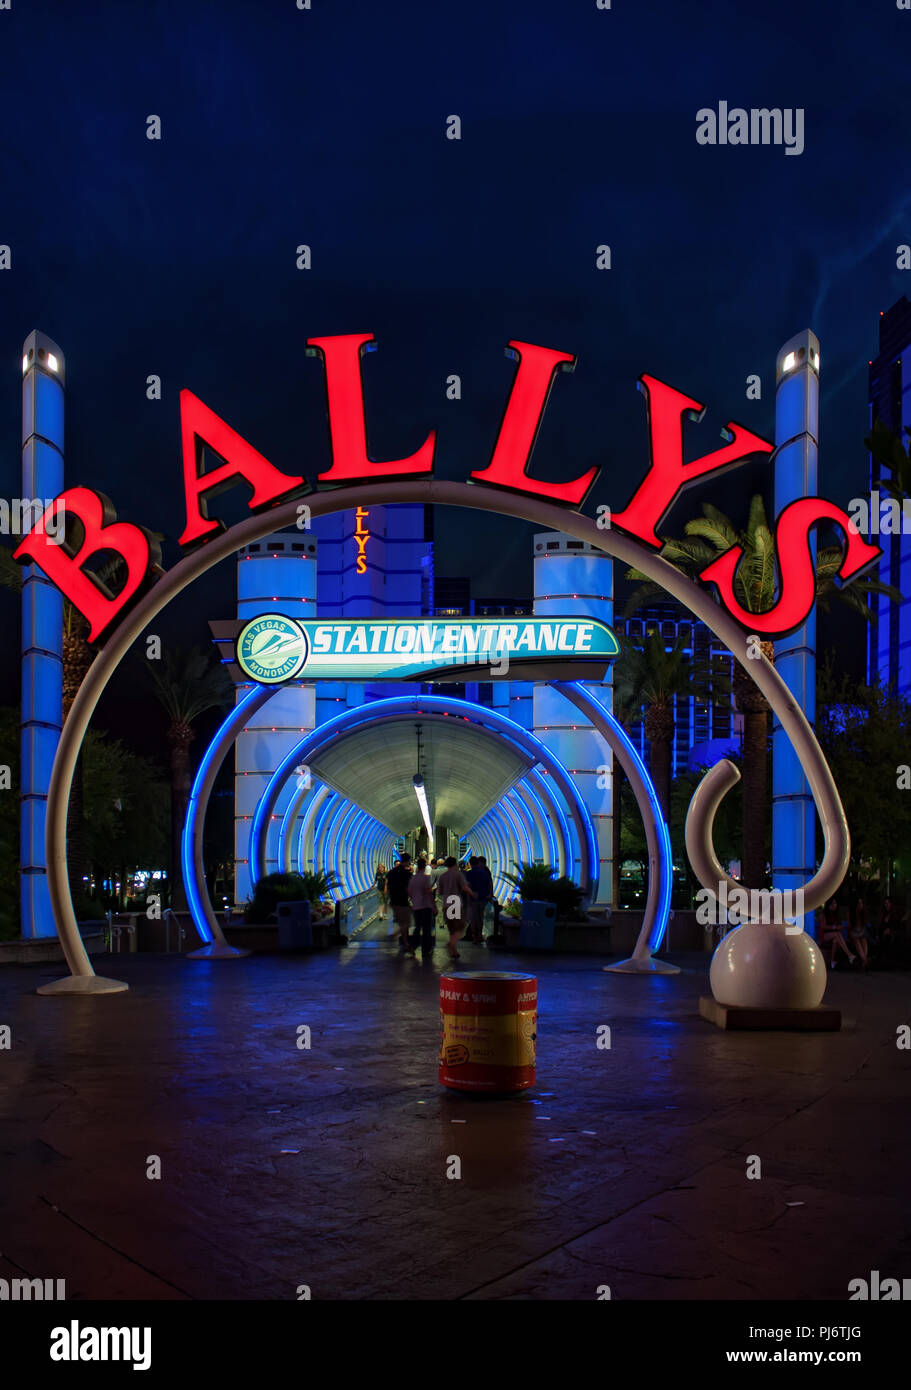 LAS VEGAS, NEVADA, USA - May 31, 2009: The entrance to Las Vegas monorail at Bally's Las Vegas in Las Vegas, Nevada. Bally's is located on the Strip a Stock Photo